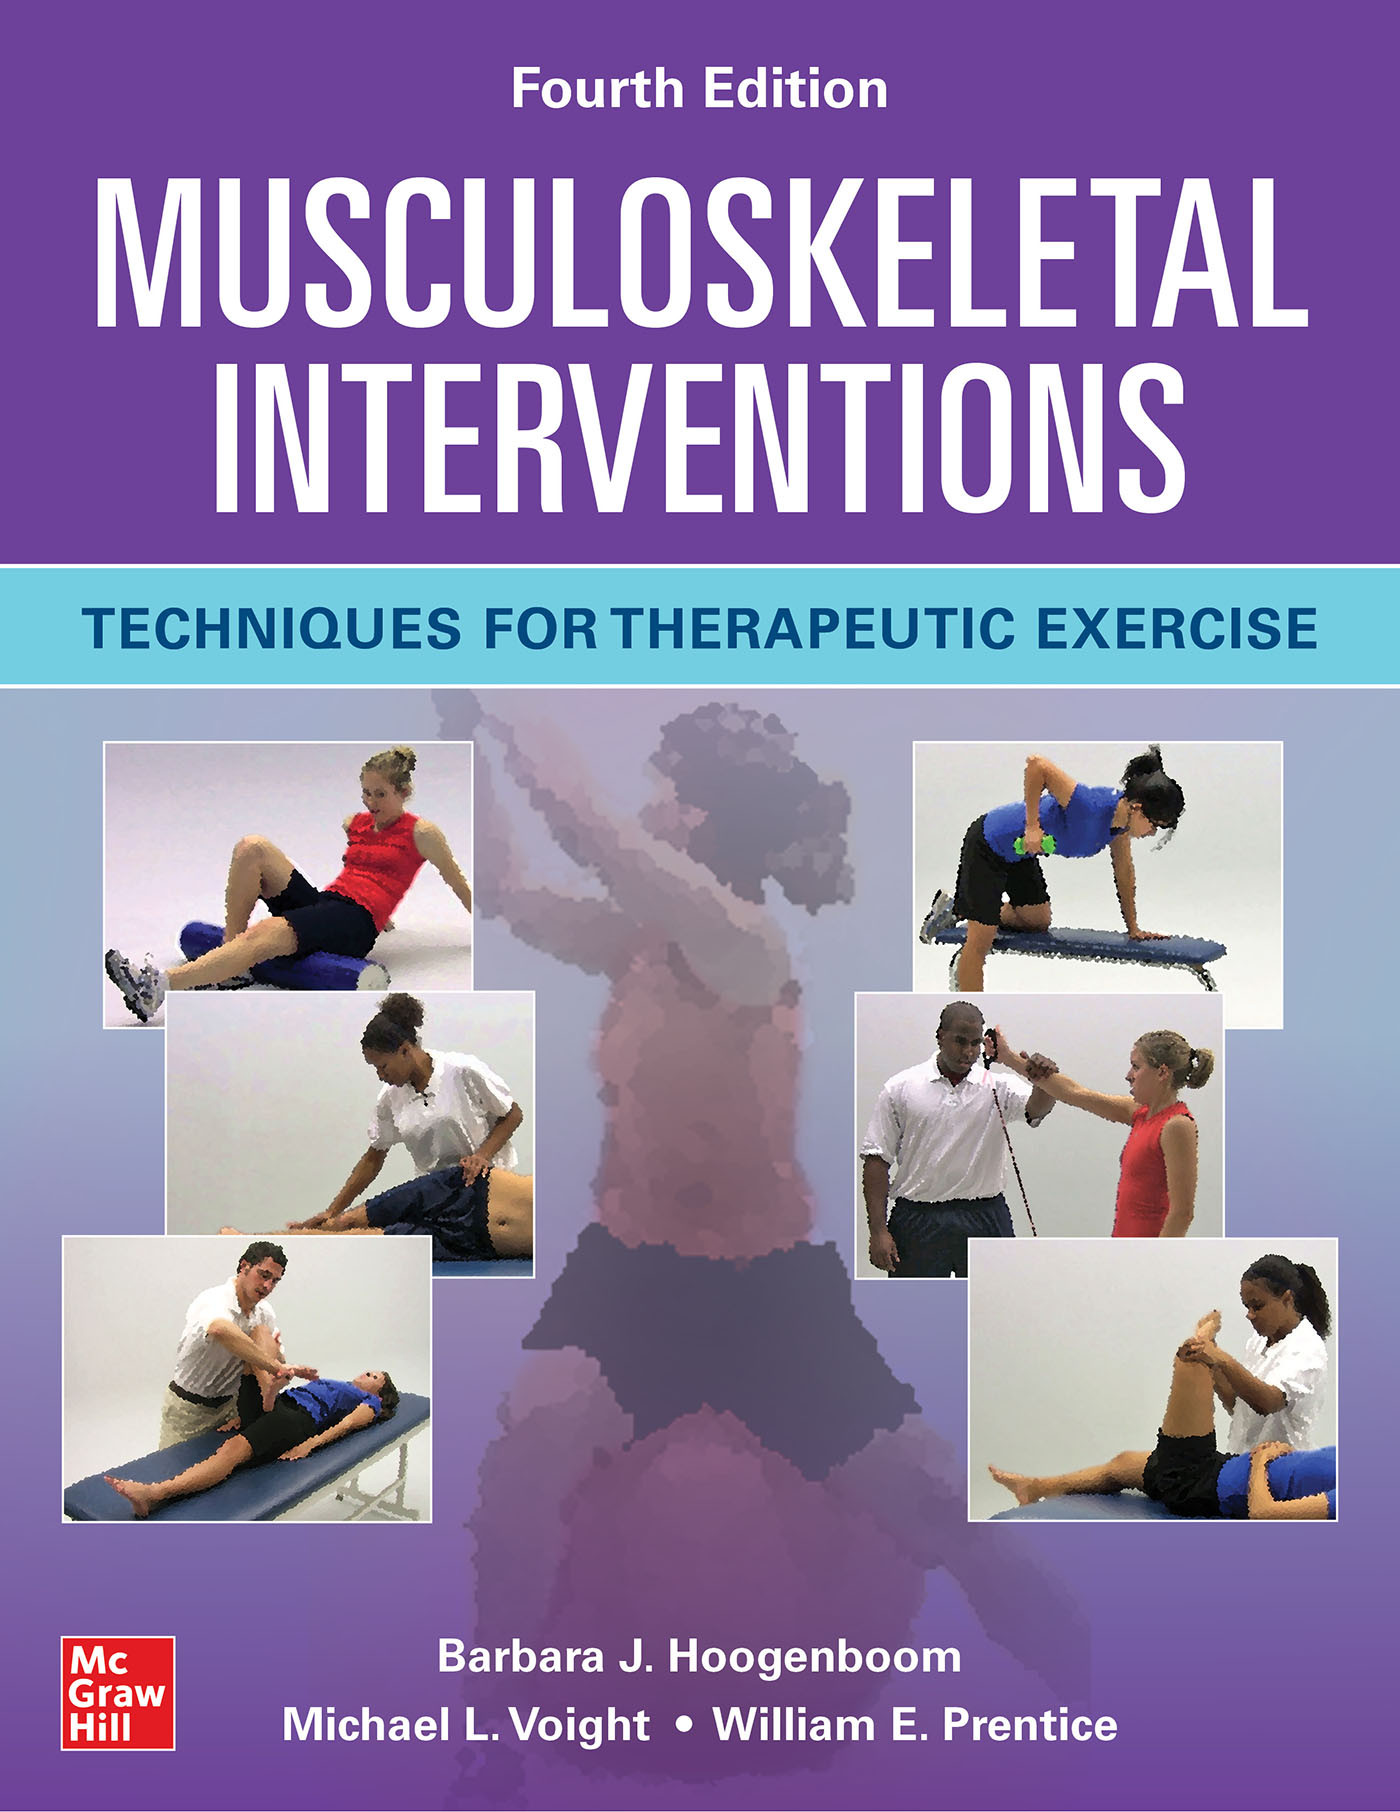 Musculoskeletal Interventions, 4th ed.- Techniques for Therapeutic Exercise